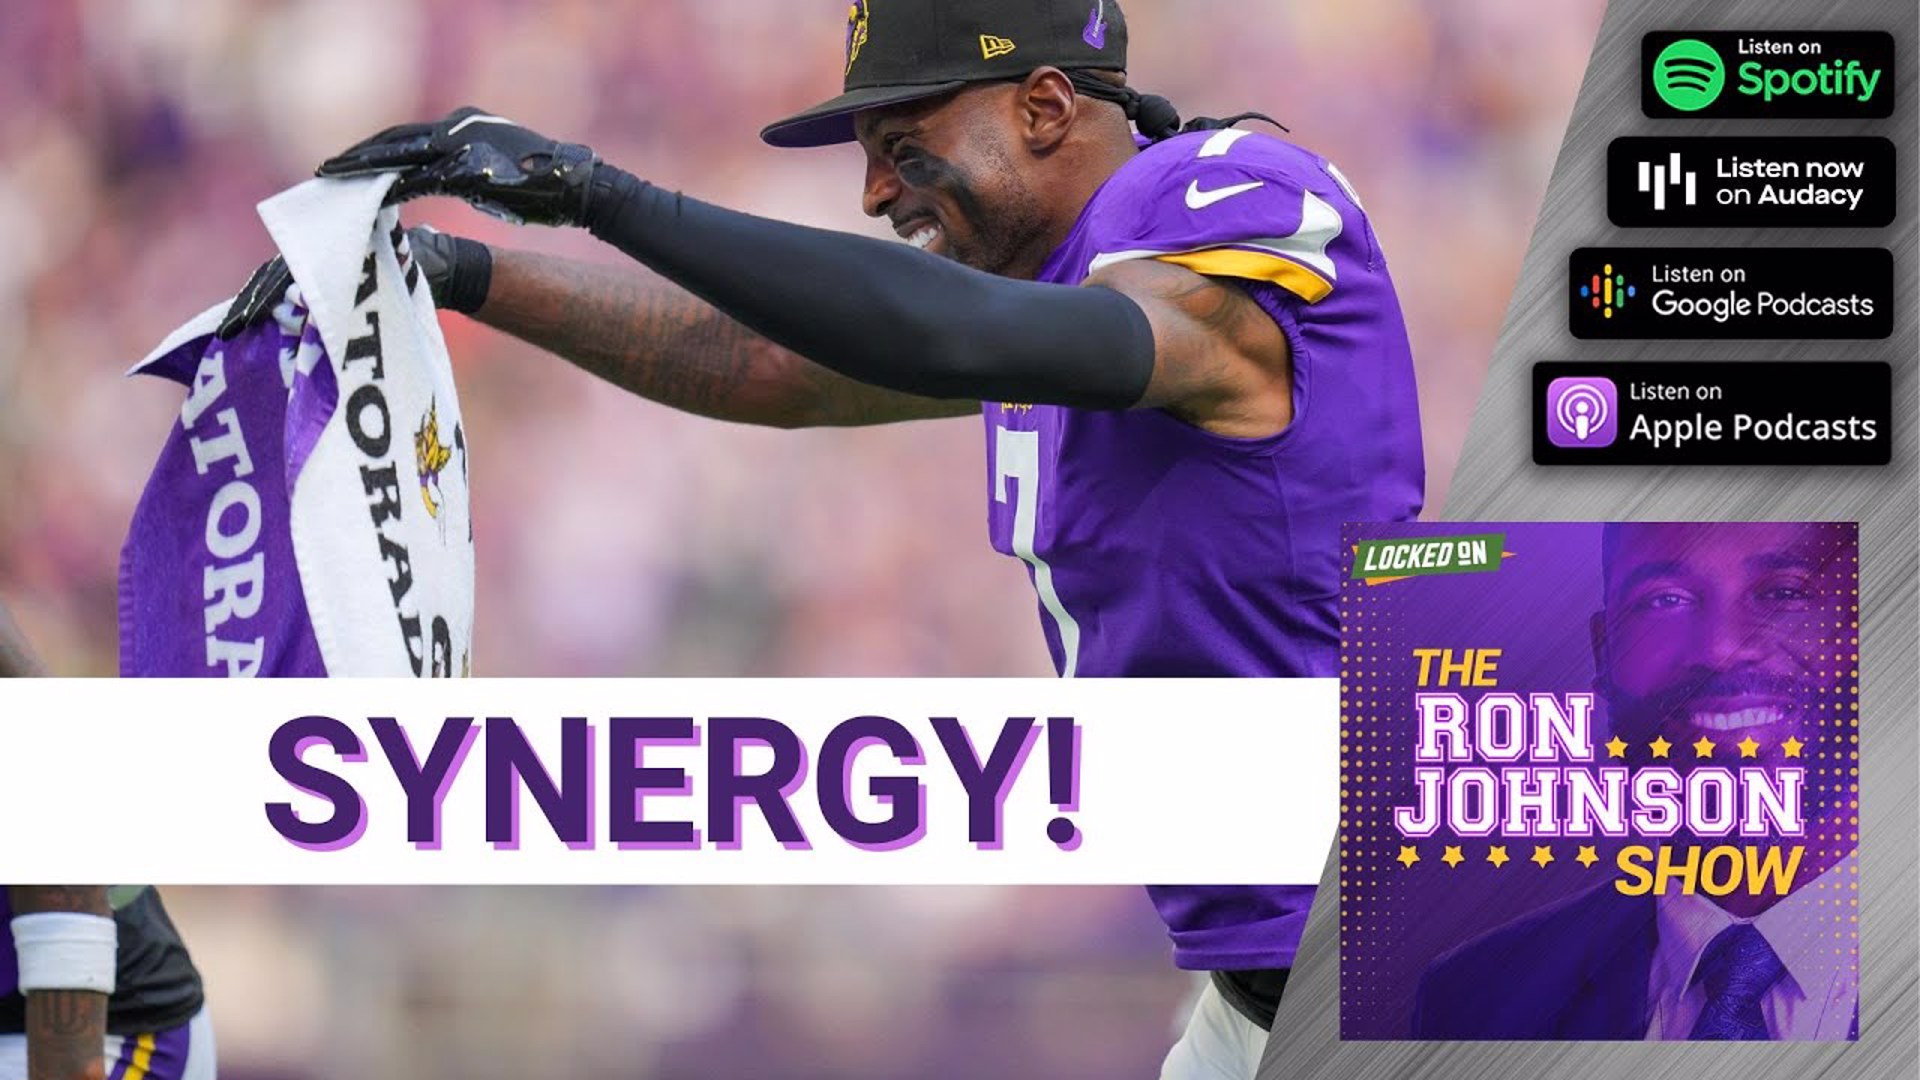 Where the Minnesota Vikings Stand in the NFC & Hangin' With Jordan Taylor, The Ron Johnson Show